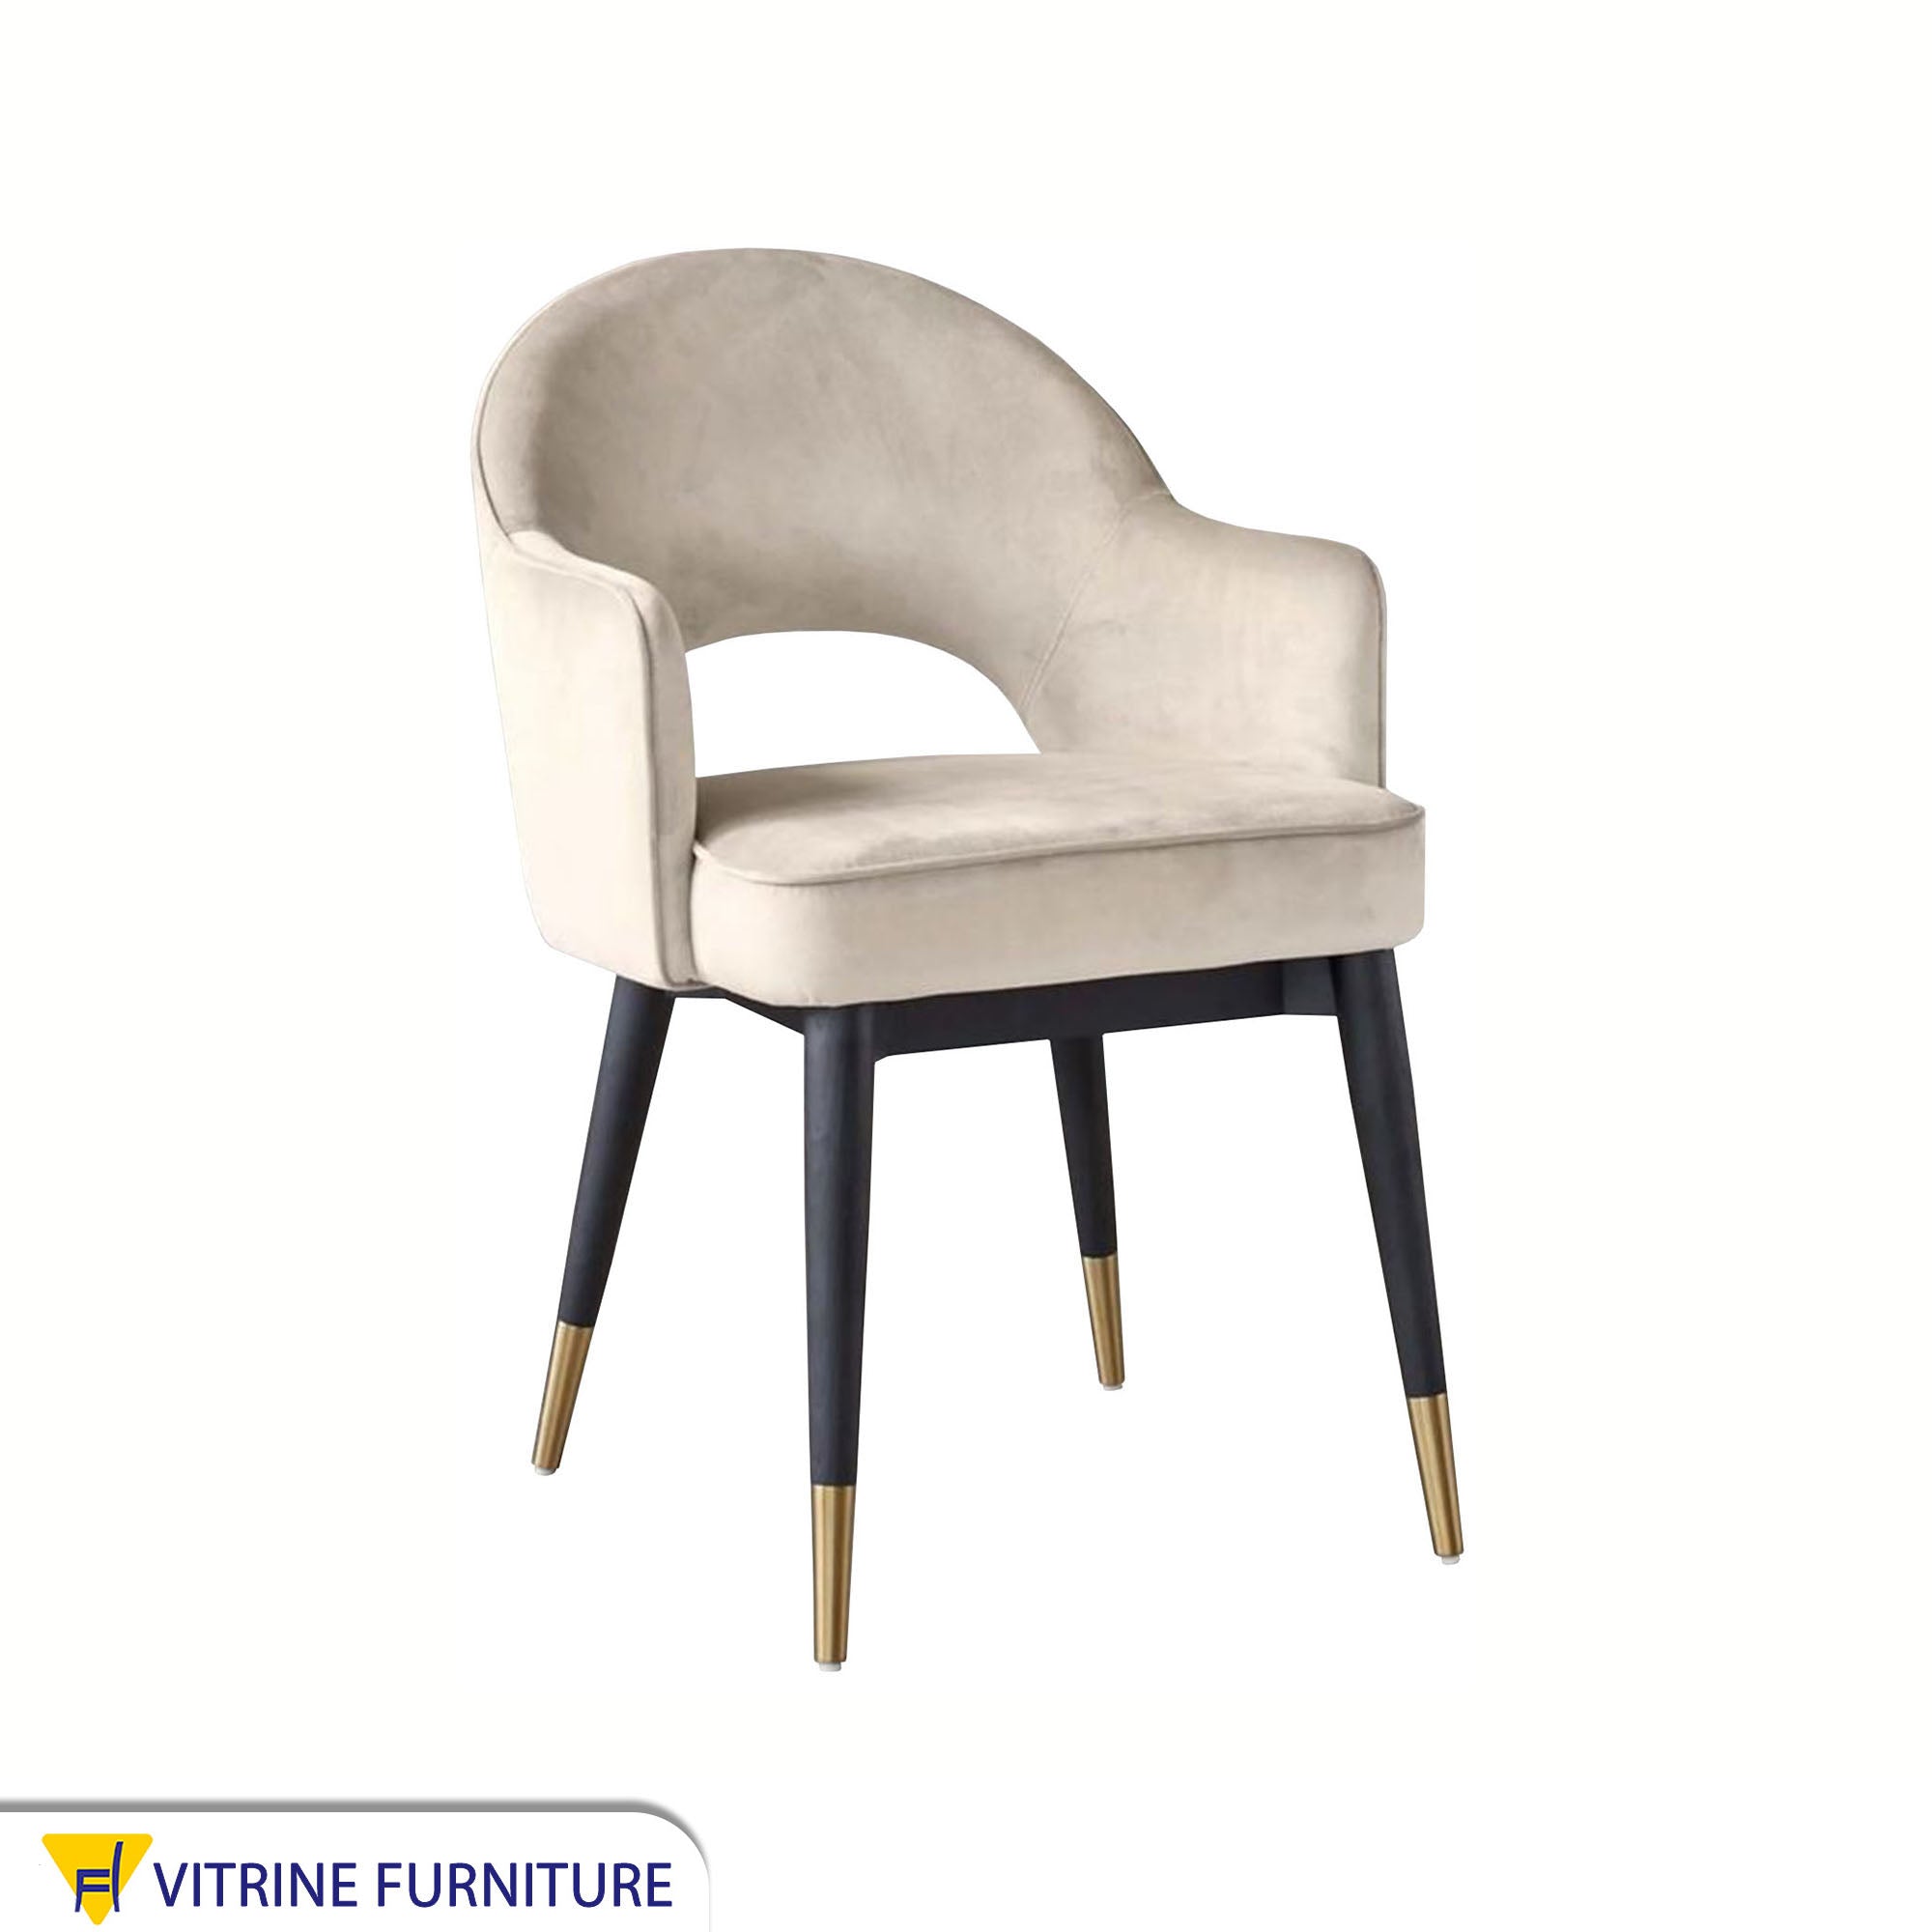 Table chair with side armrests